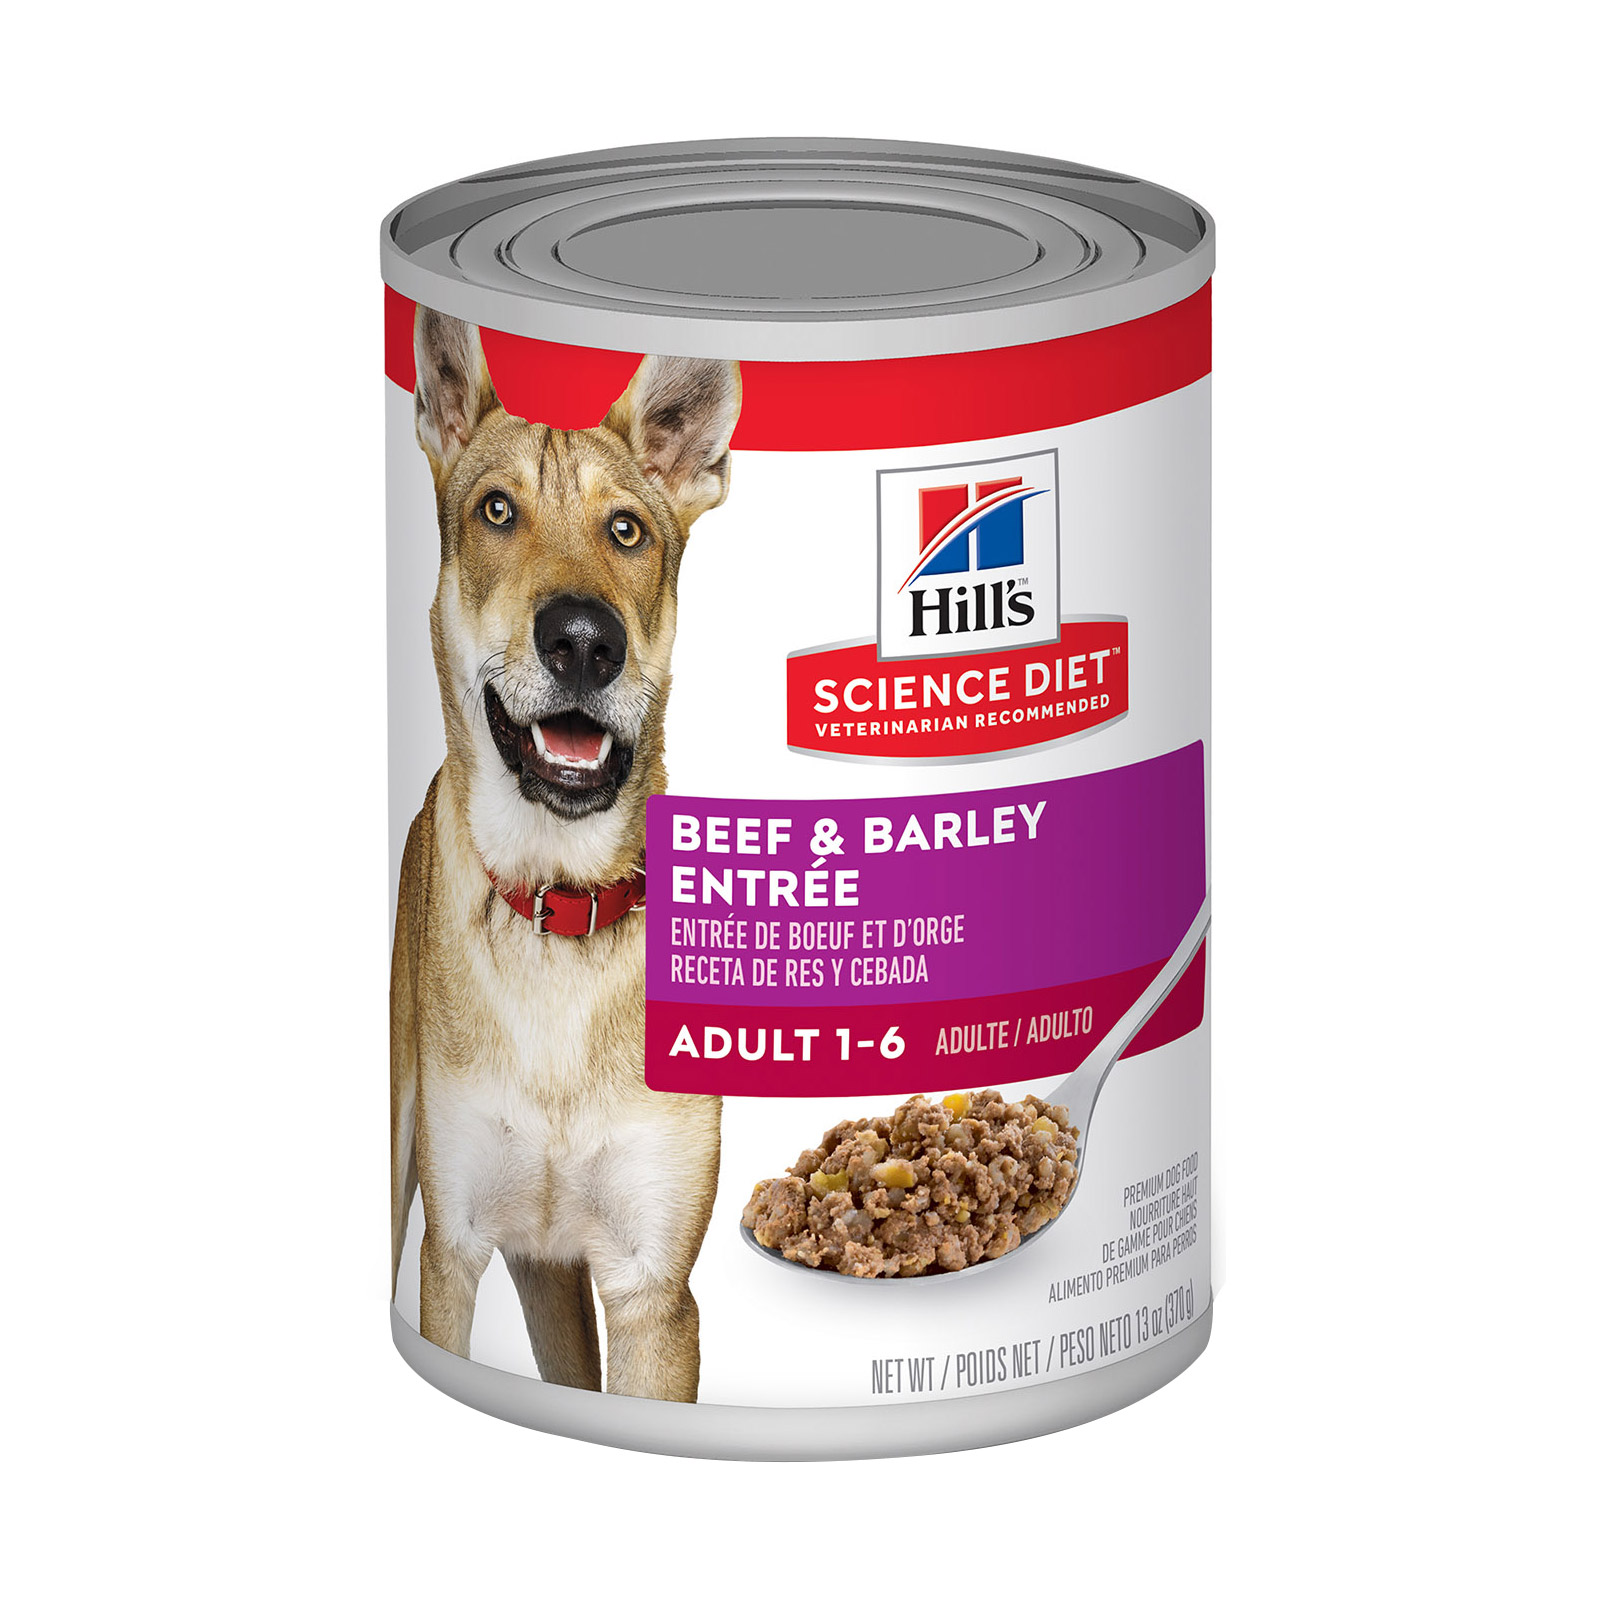 Hill’s Science Diet Adult Beef and Barley Entrée Canned Dog Food for Food